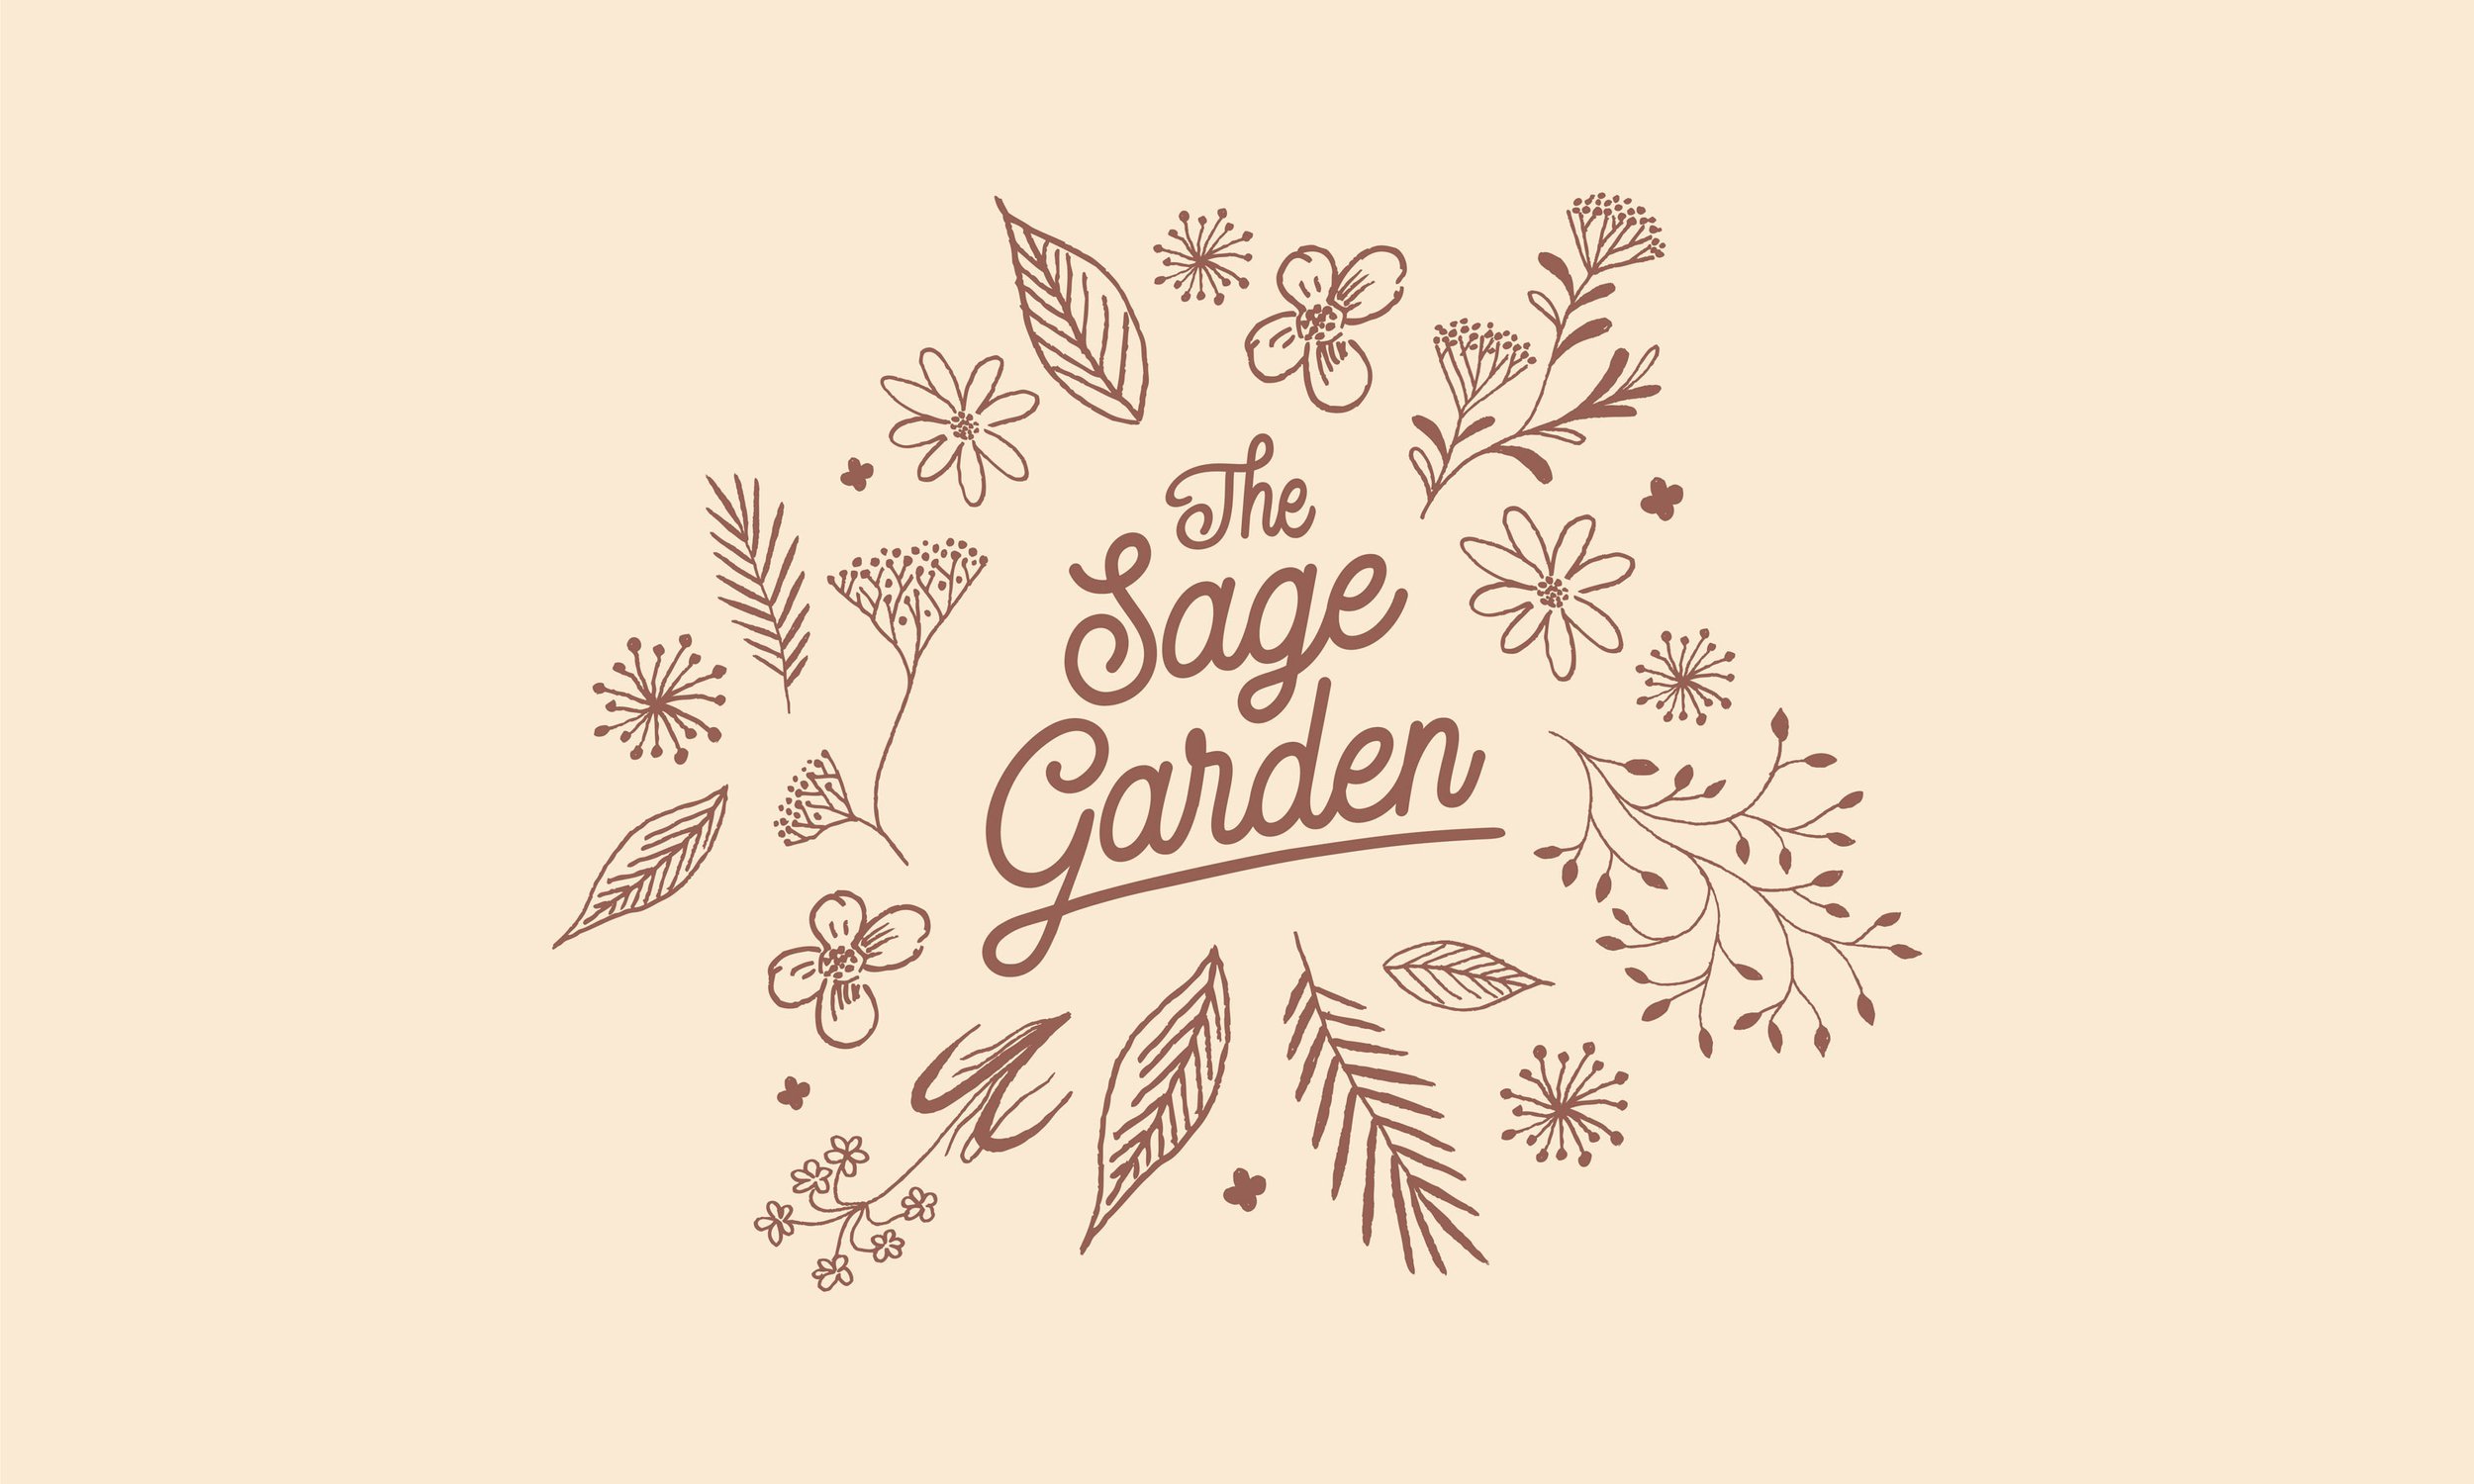  The Sage Garden logo surrounded by leaves and flowers. 